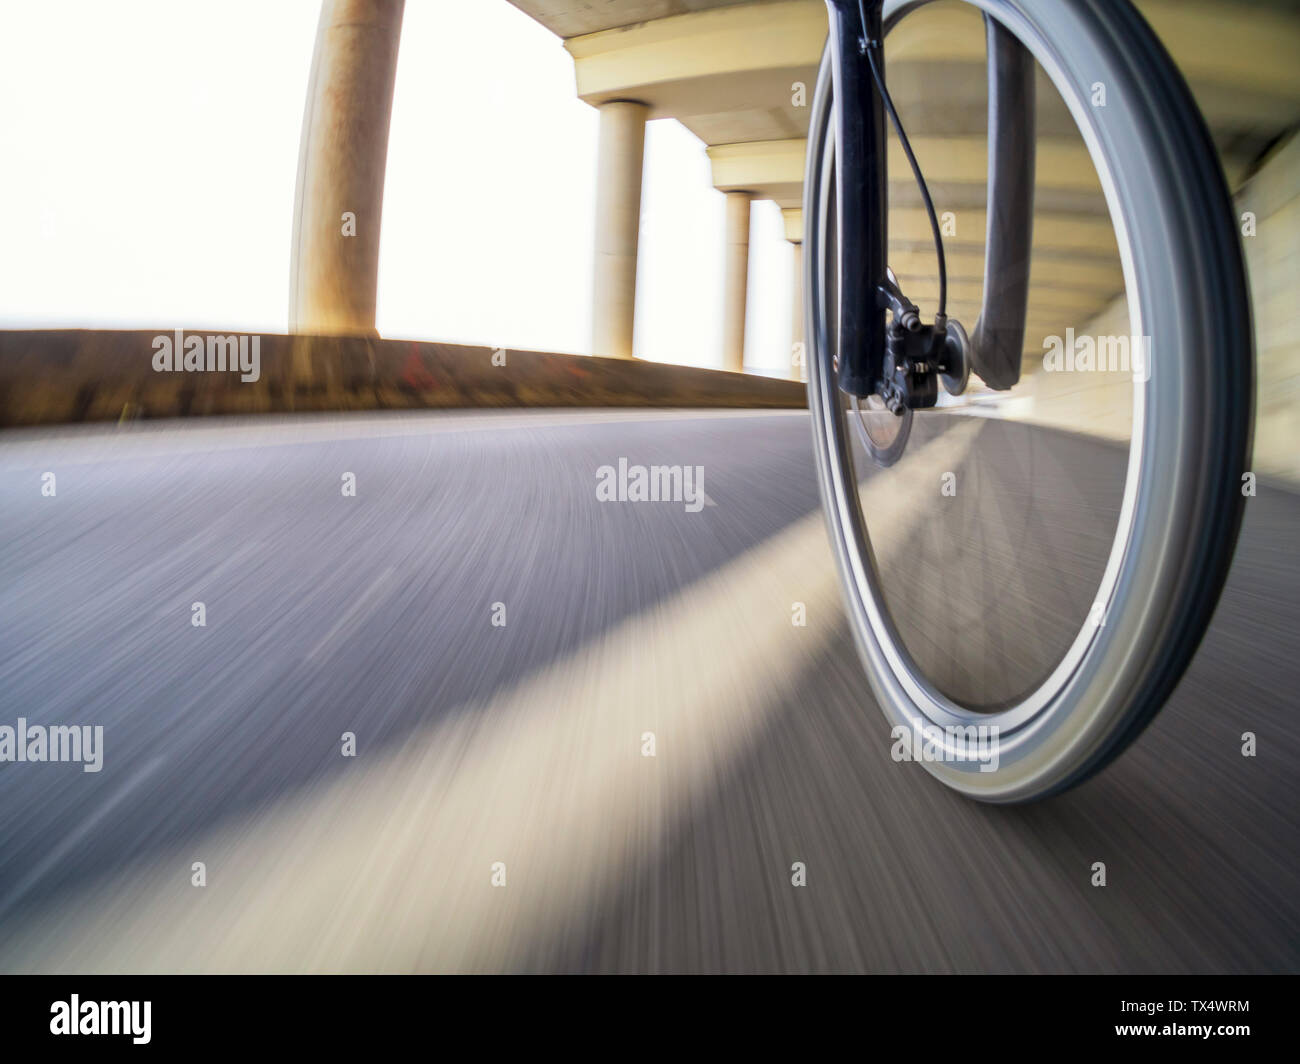 Spain, ride a bicycle, speed Stock Photo